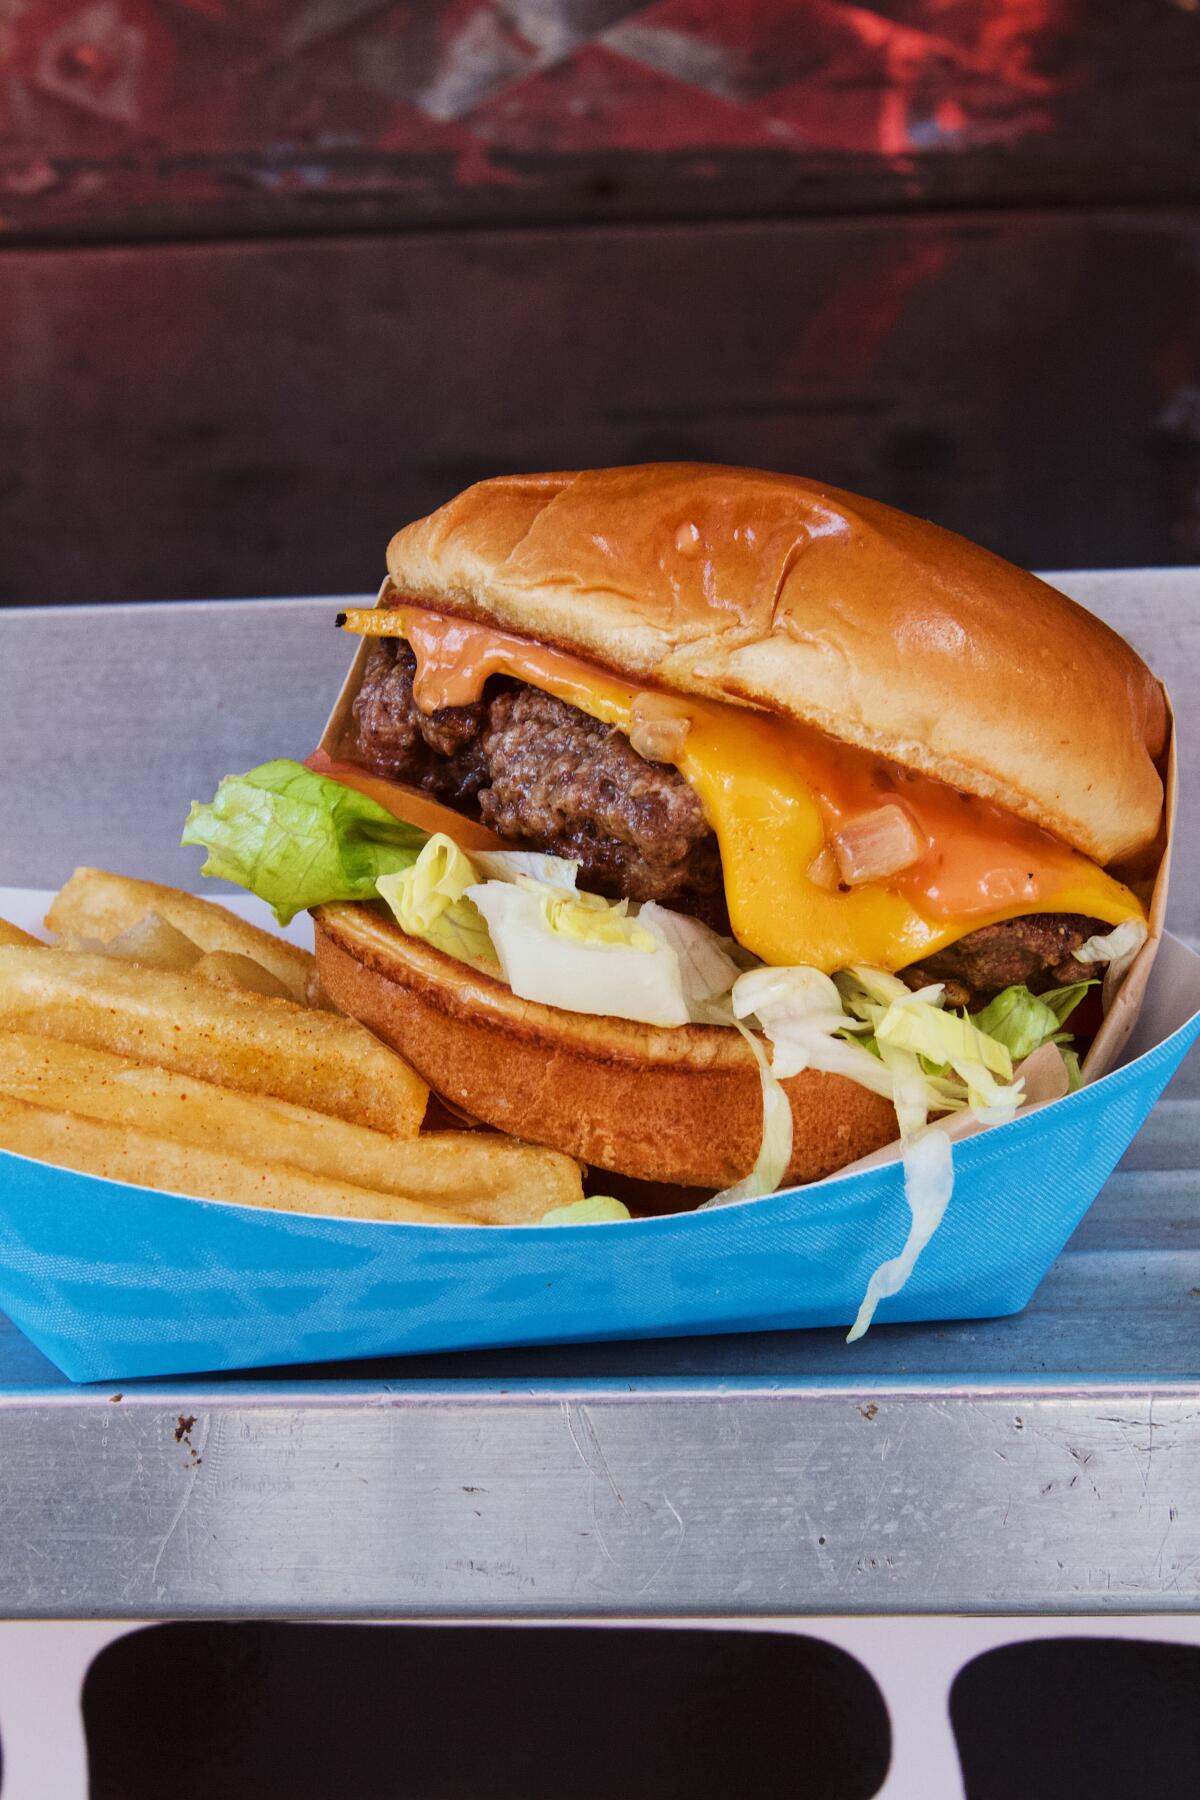 A single Thicc Burger cheeseburger with fries in a blue cardboard dish.